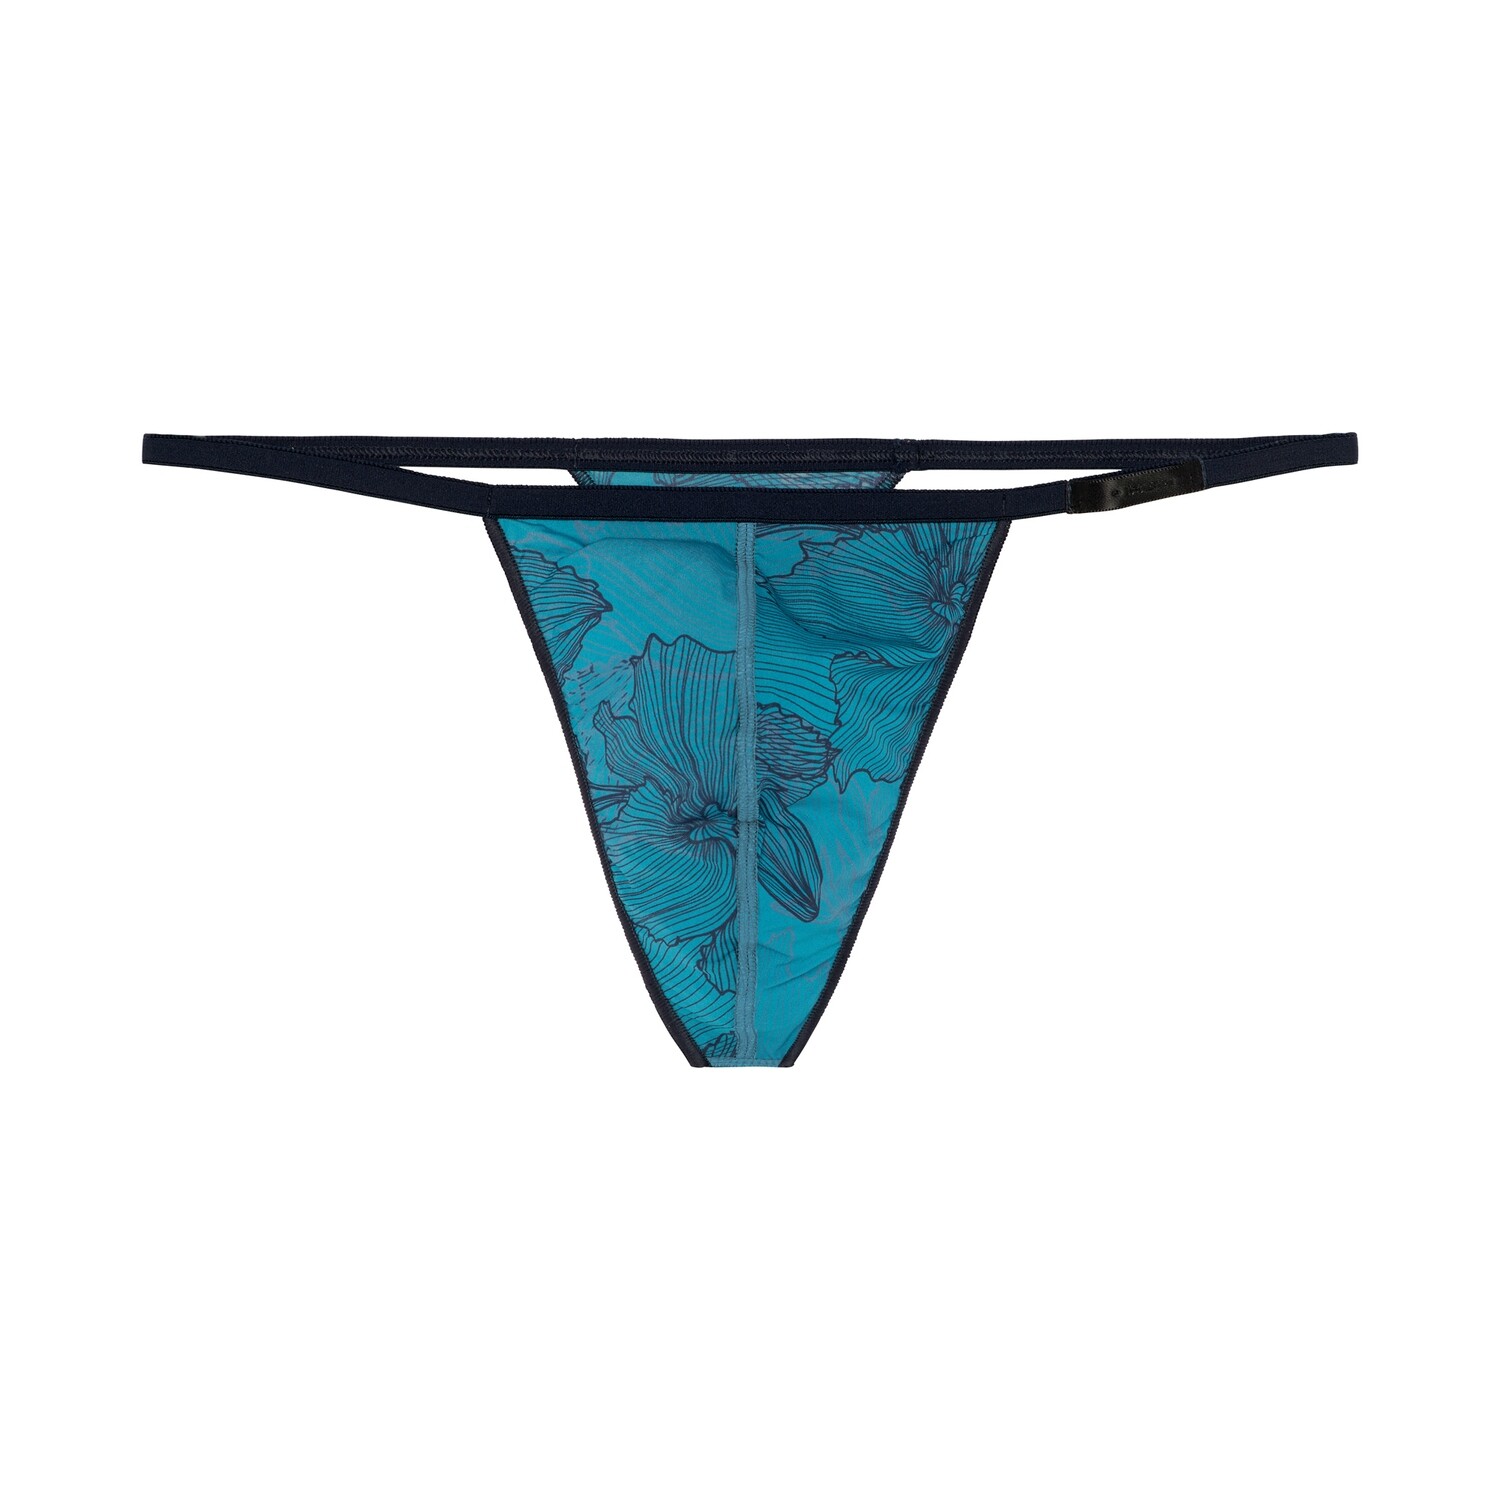 HOM G-string Fano Plume, Size: M